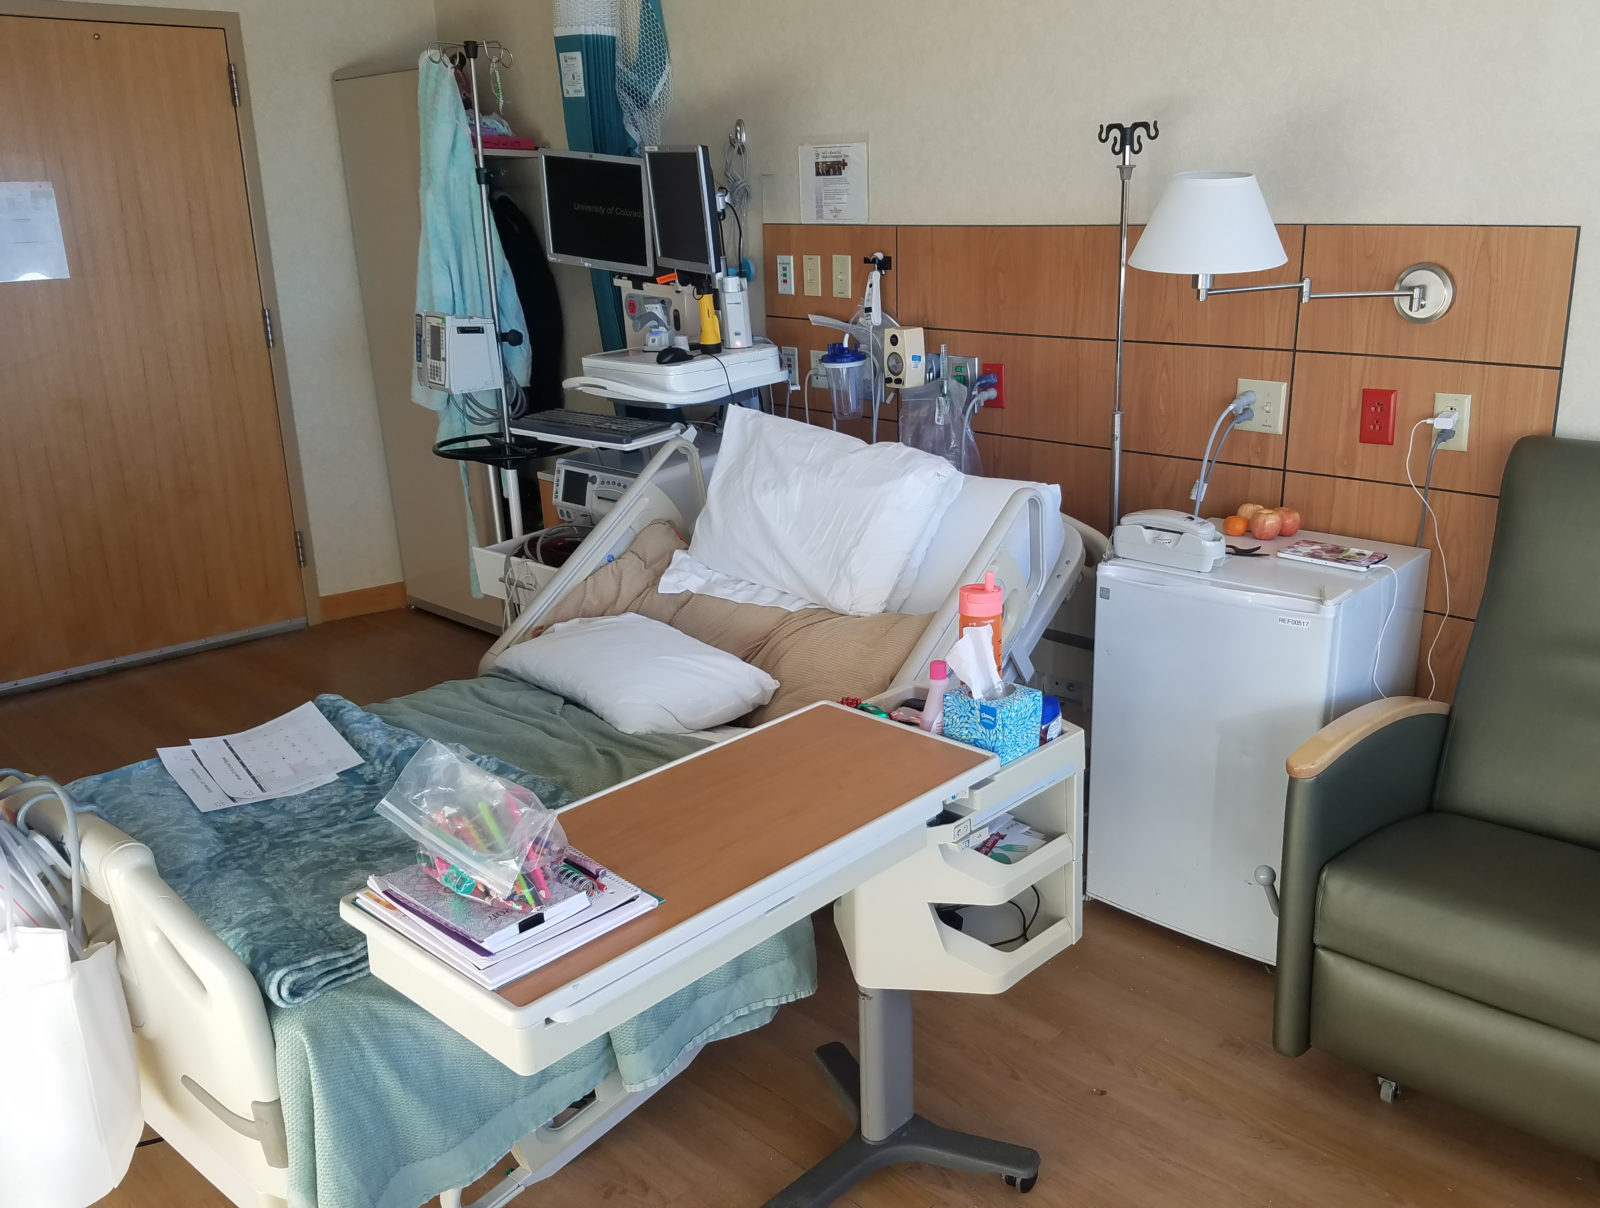 A photo of the hospital room the author spent over two weeks in at UCHealth Anschutz in Aurora Colorado. Shows authors own belongings amongst the hospital equipment.